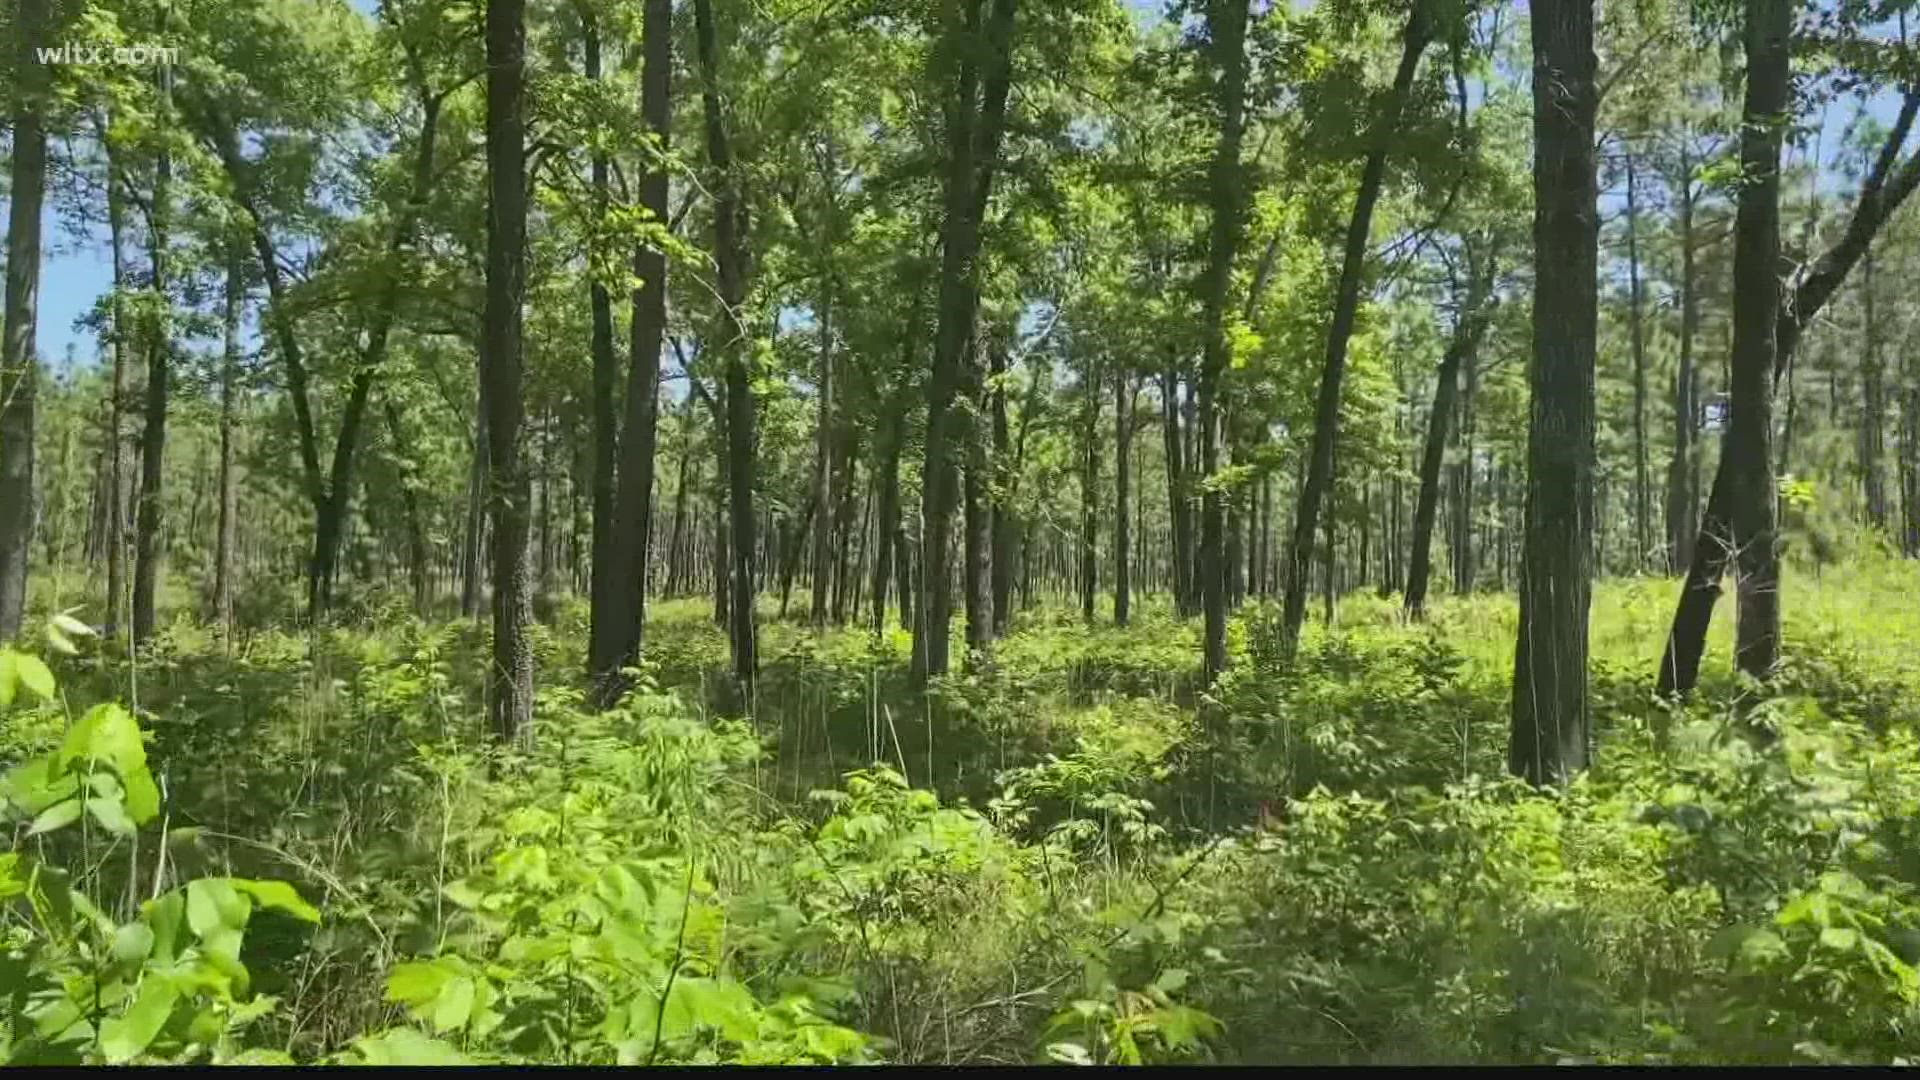 Fort Jackson is well known as an army training post, but it's also a place where research on plants, animals, and insects takes place.